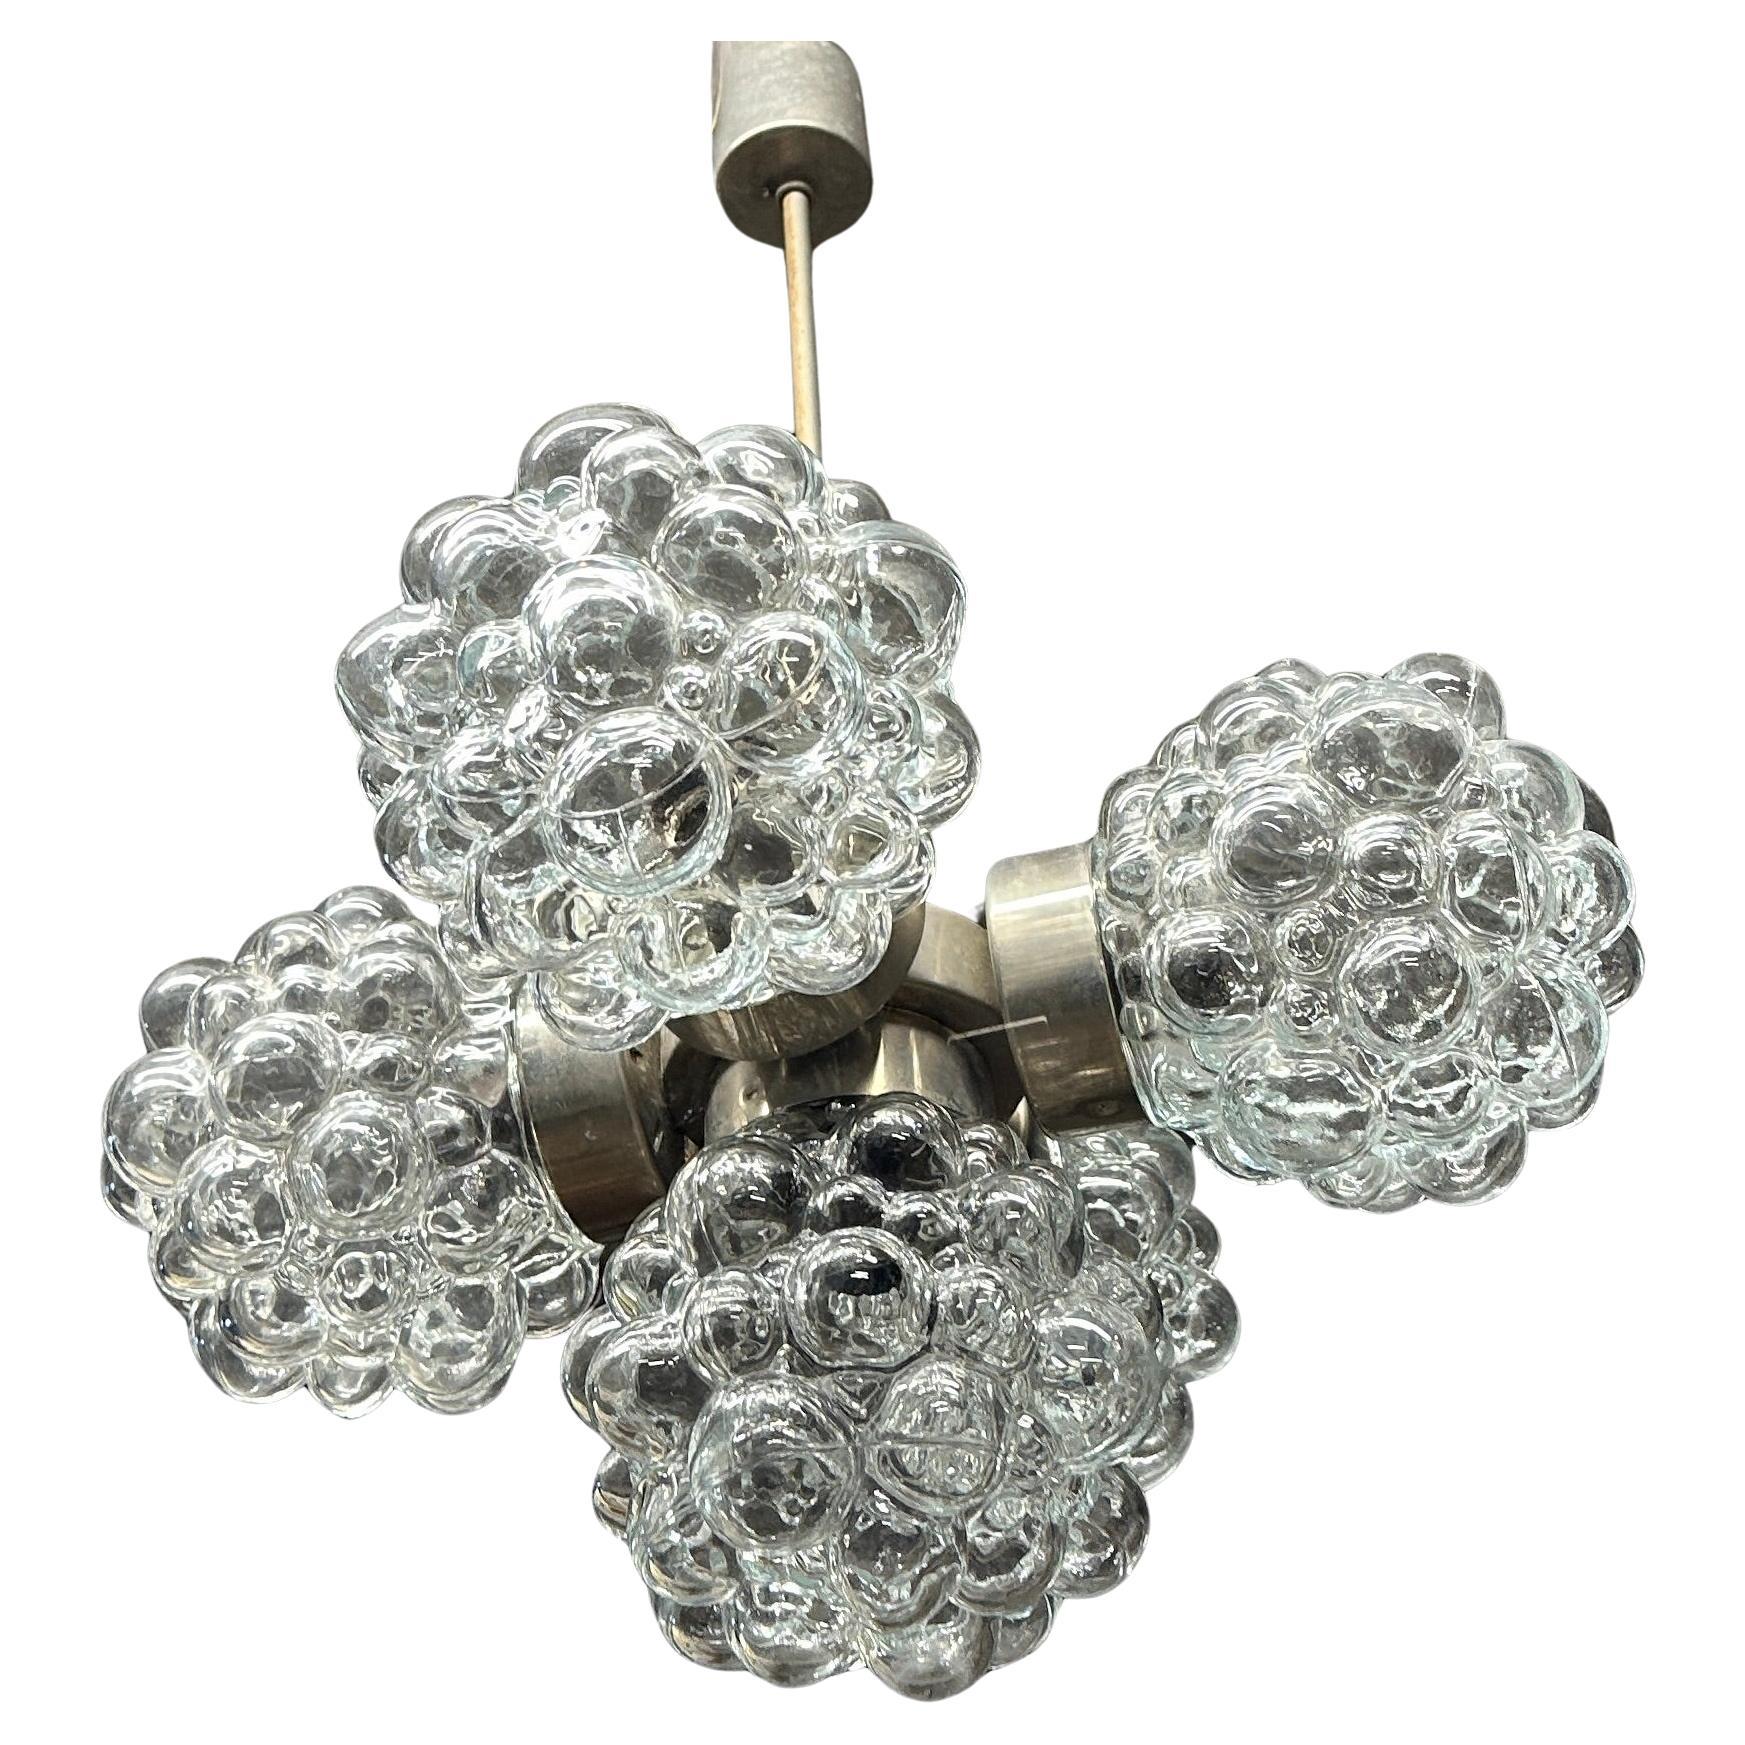 5 Light Bubble Glass Helena Tynell Style Chandelier, Austria 1960s For Sale